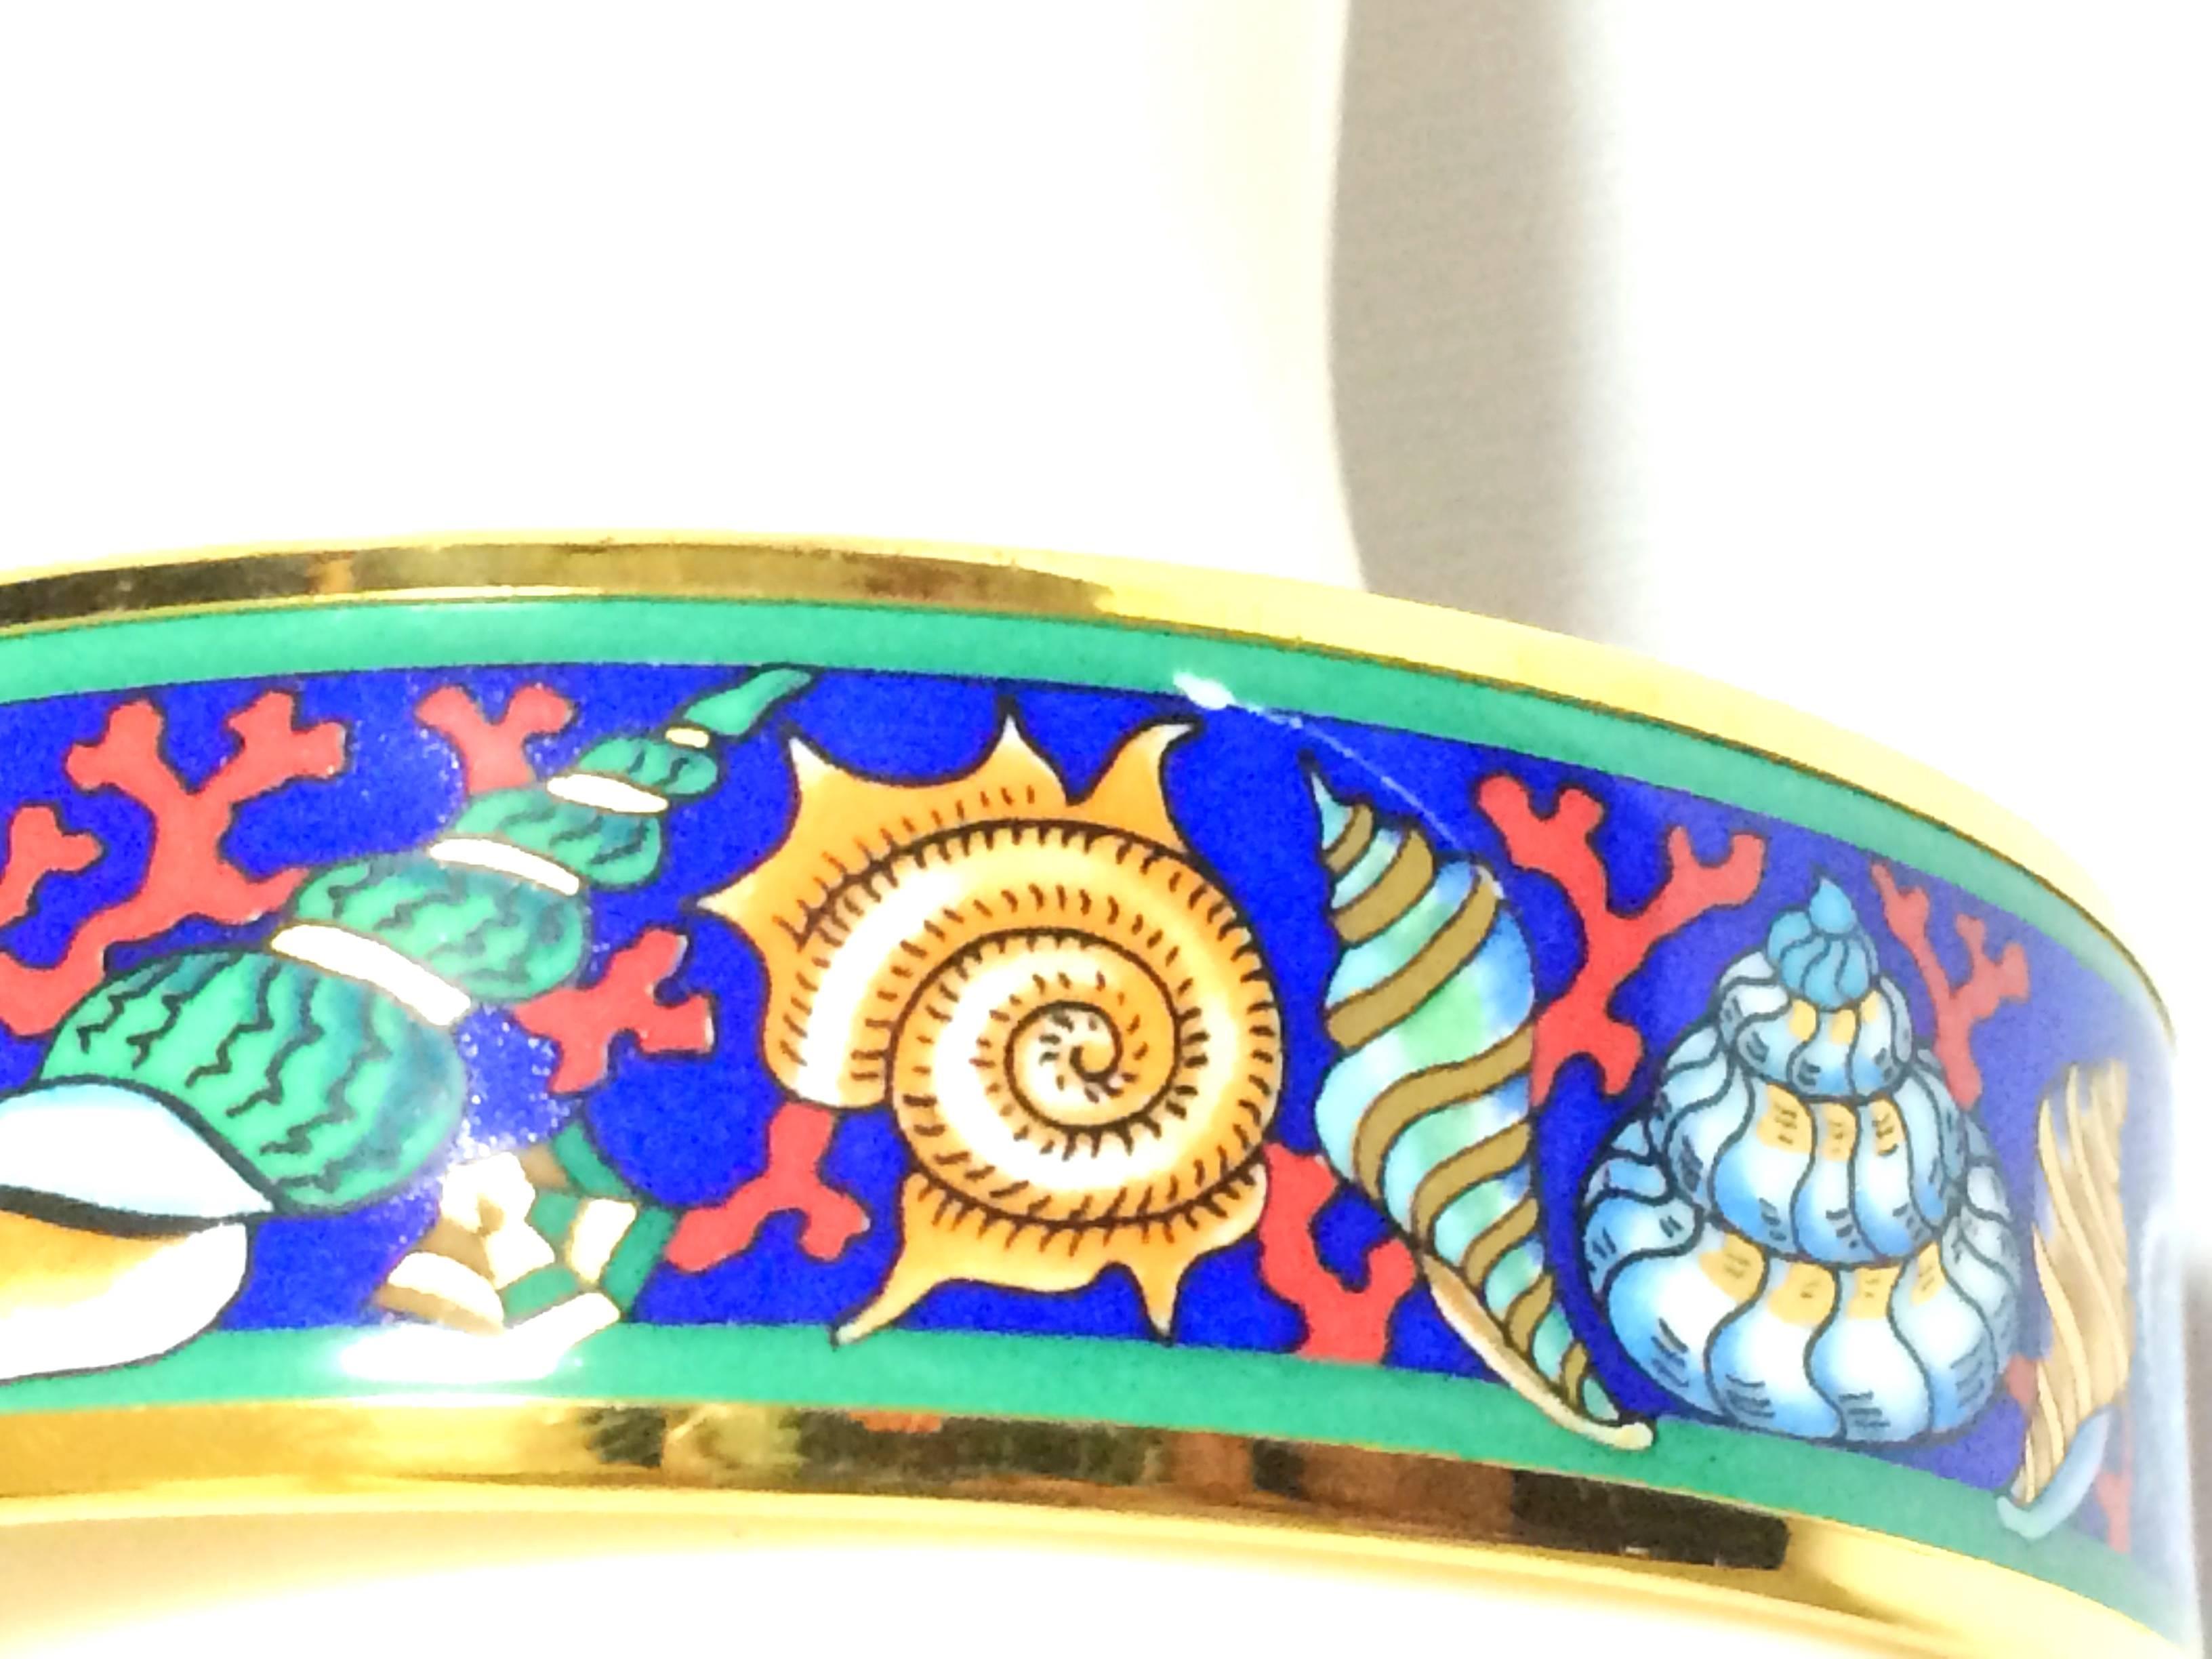 1990s. Vintage Hermes cloisonne enamel blue ocean, sea, yellow, brown, blue colorful shell, pink coral design golden thick bangle, bracelet.

Introducing a fantastic jewelry piece  from HERMES....
The iconic cloisonne enamel golden bangle!